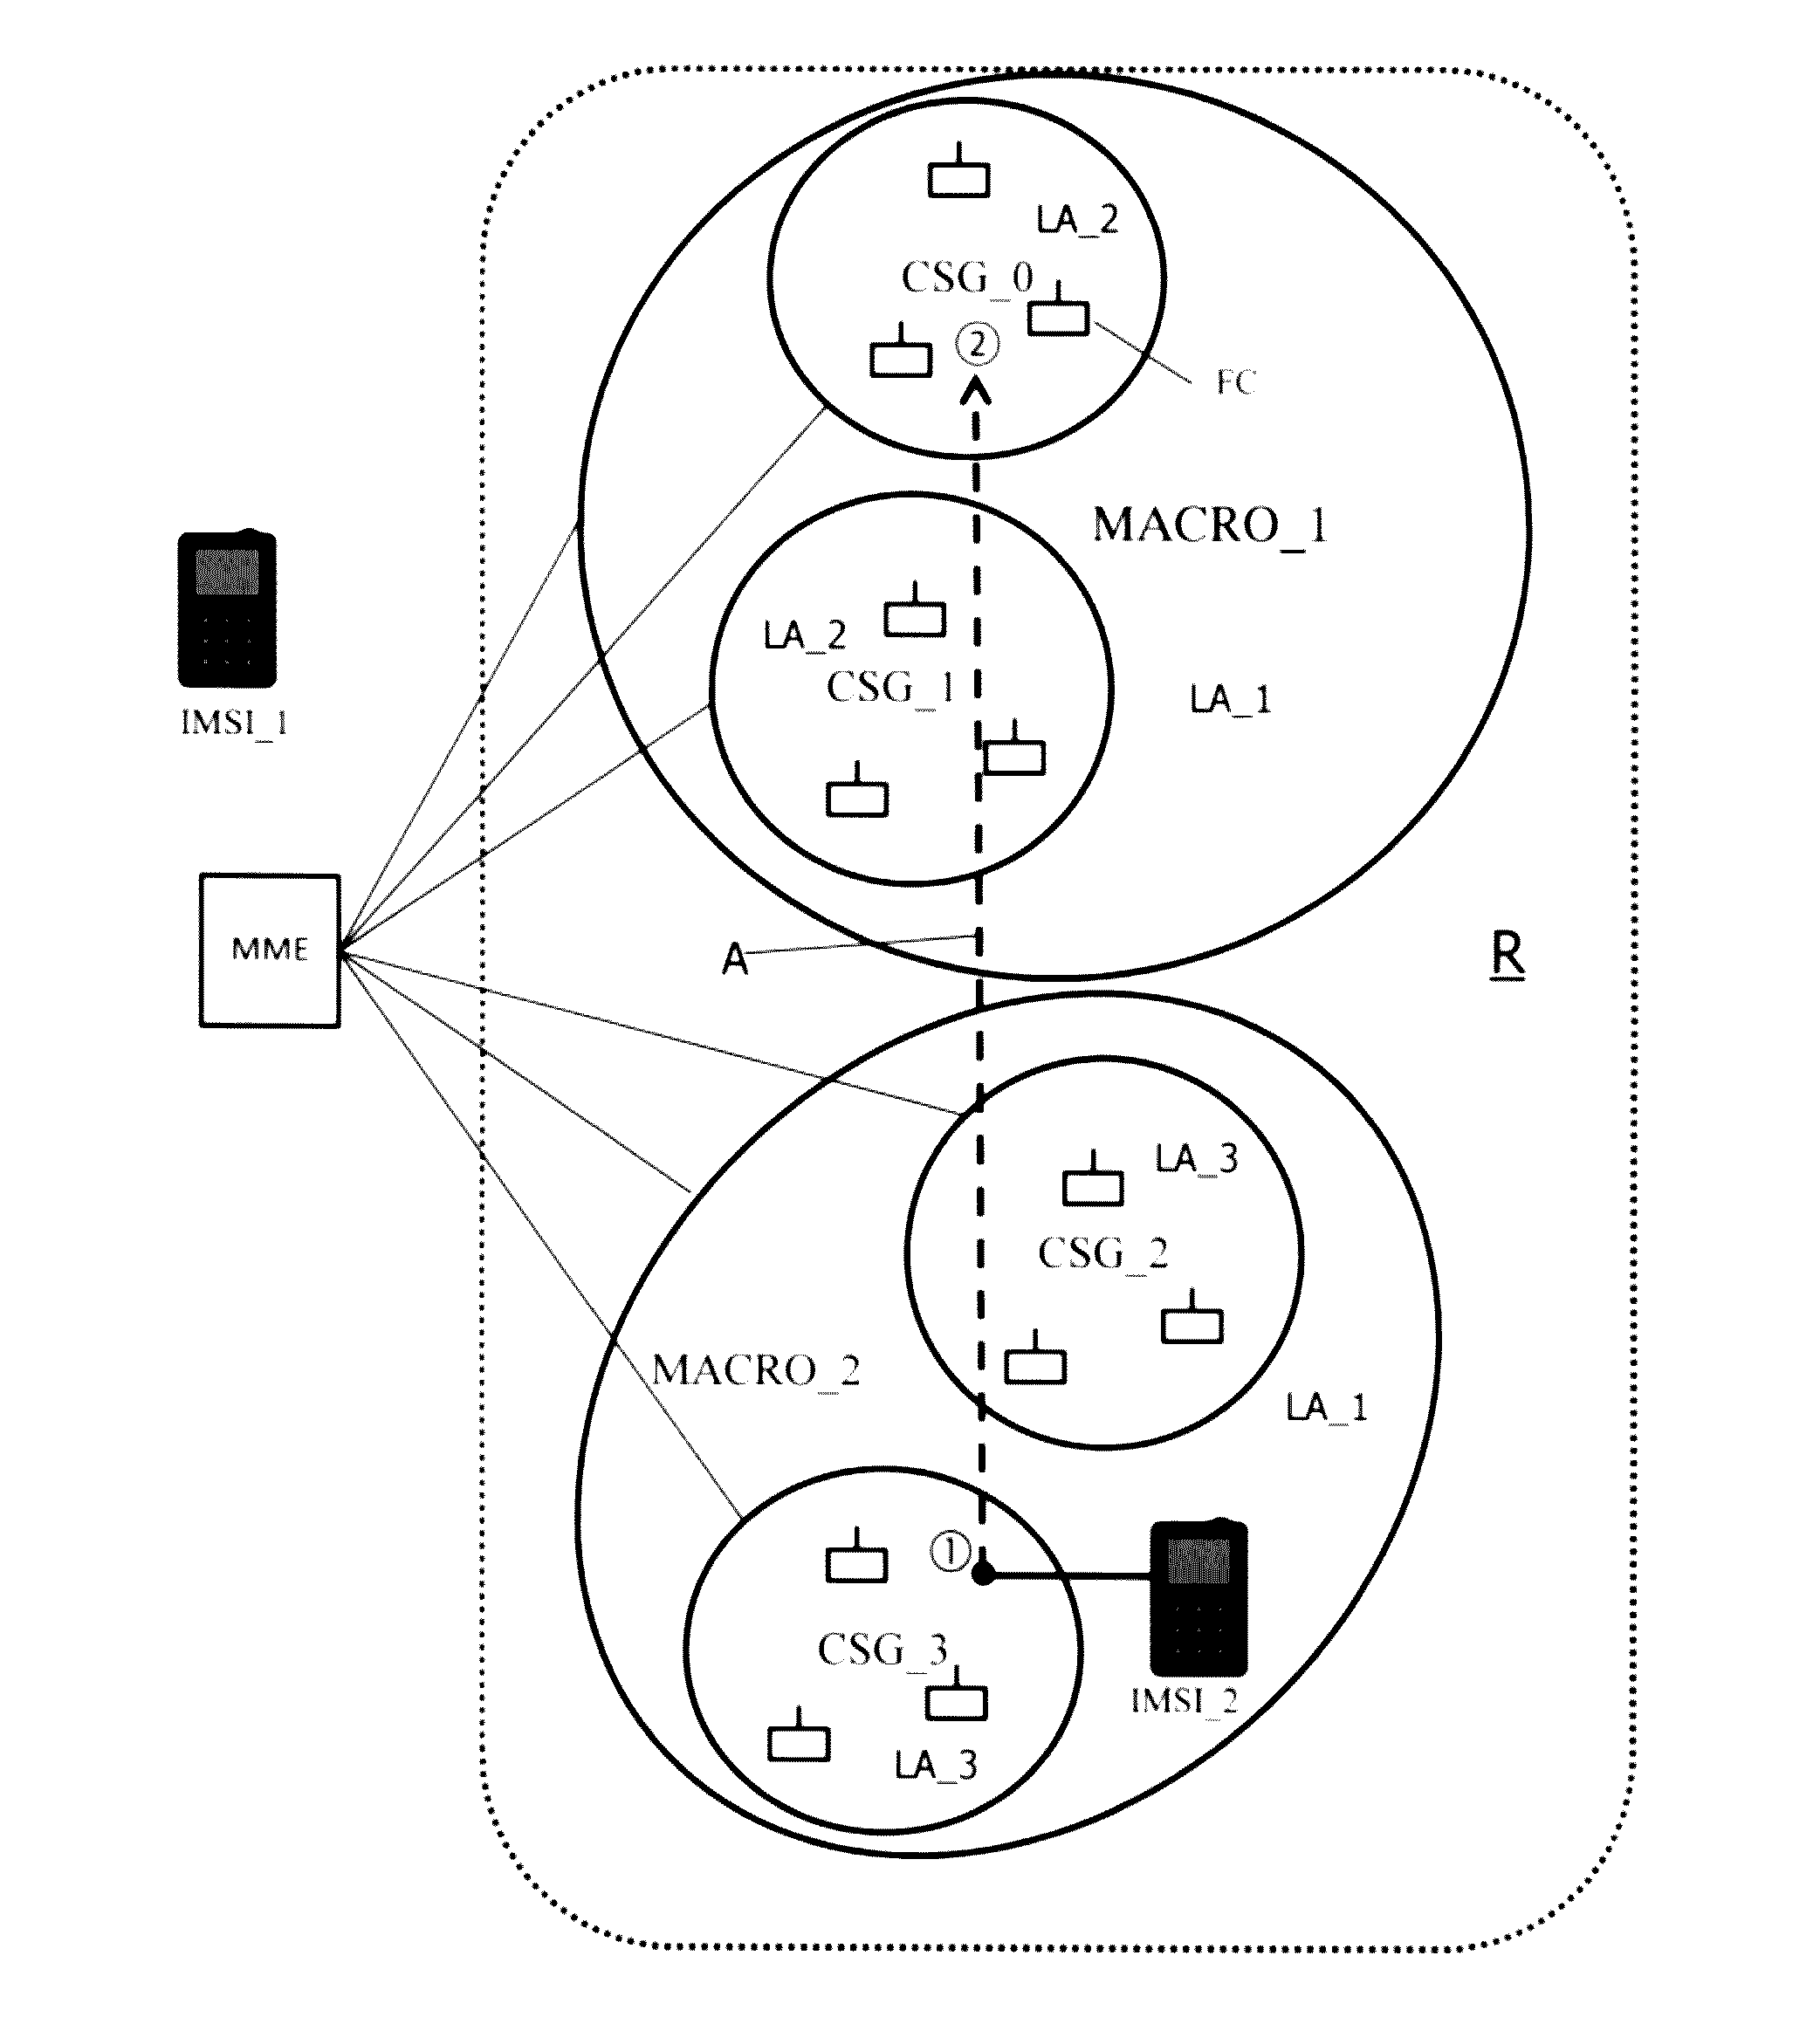 Paging in mobile networks using independent paging cells and access cells